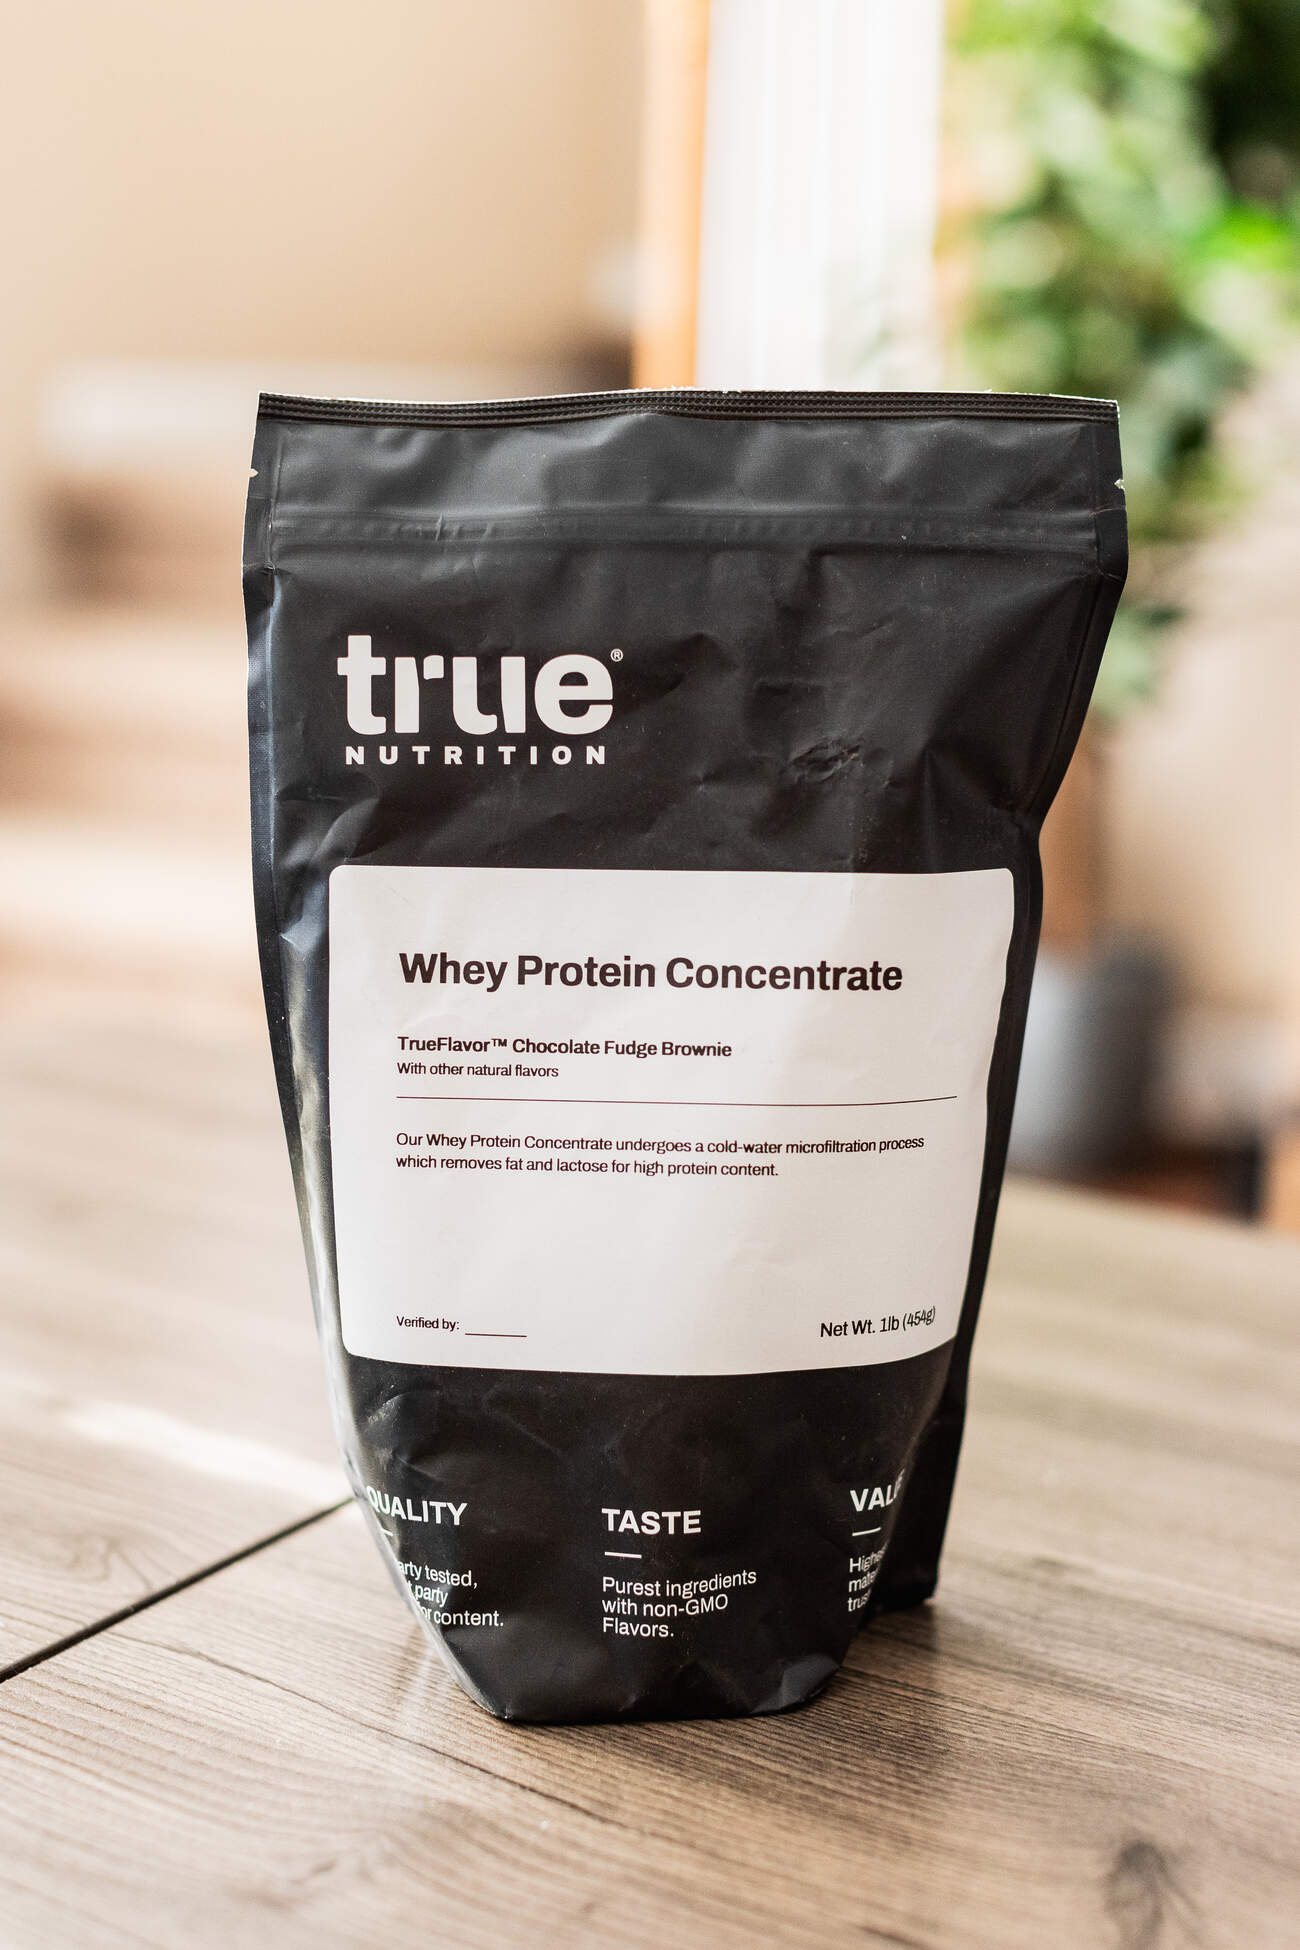 A bag of whey protein concentrate on a wooden table with soft background lighting